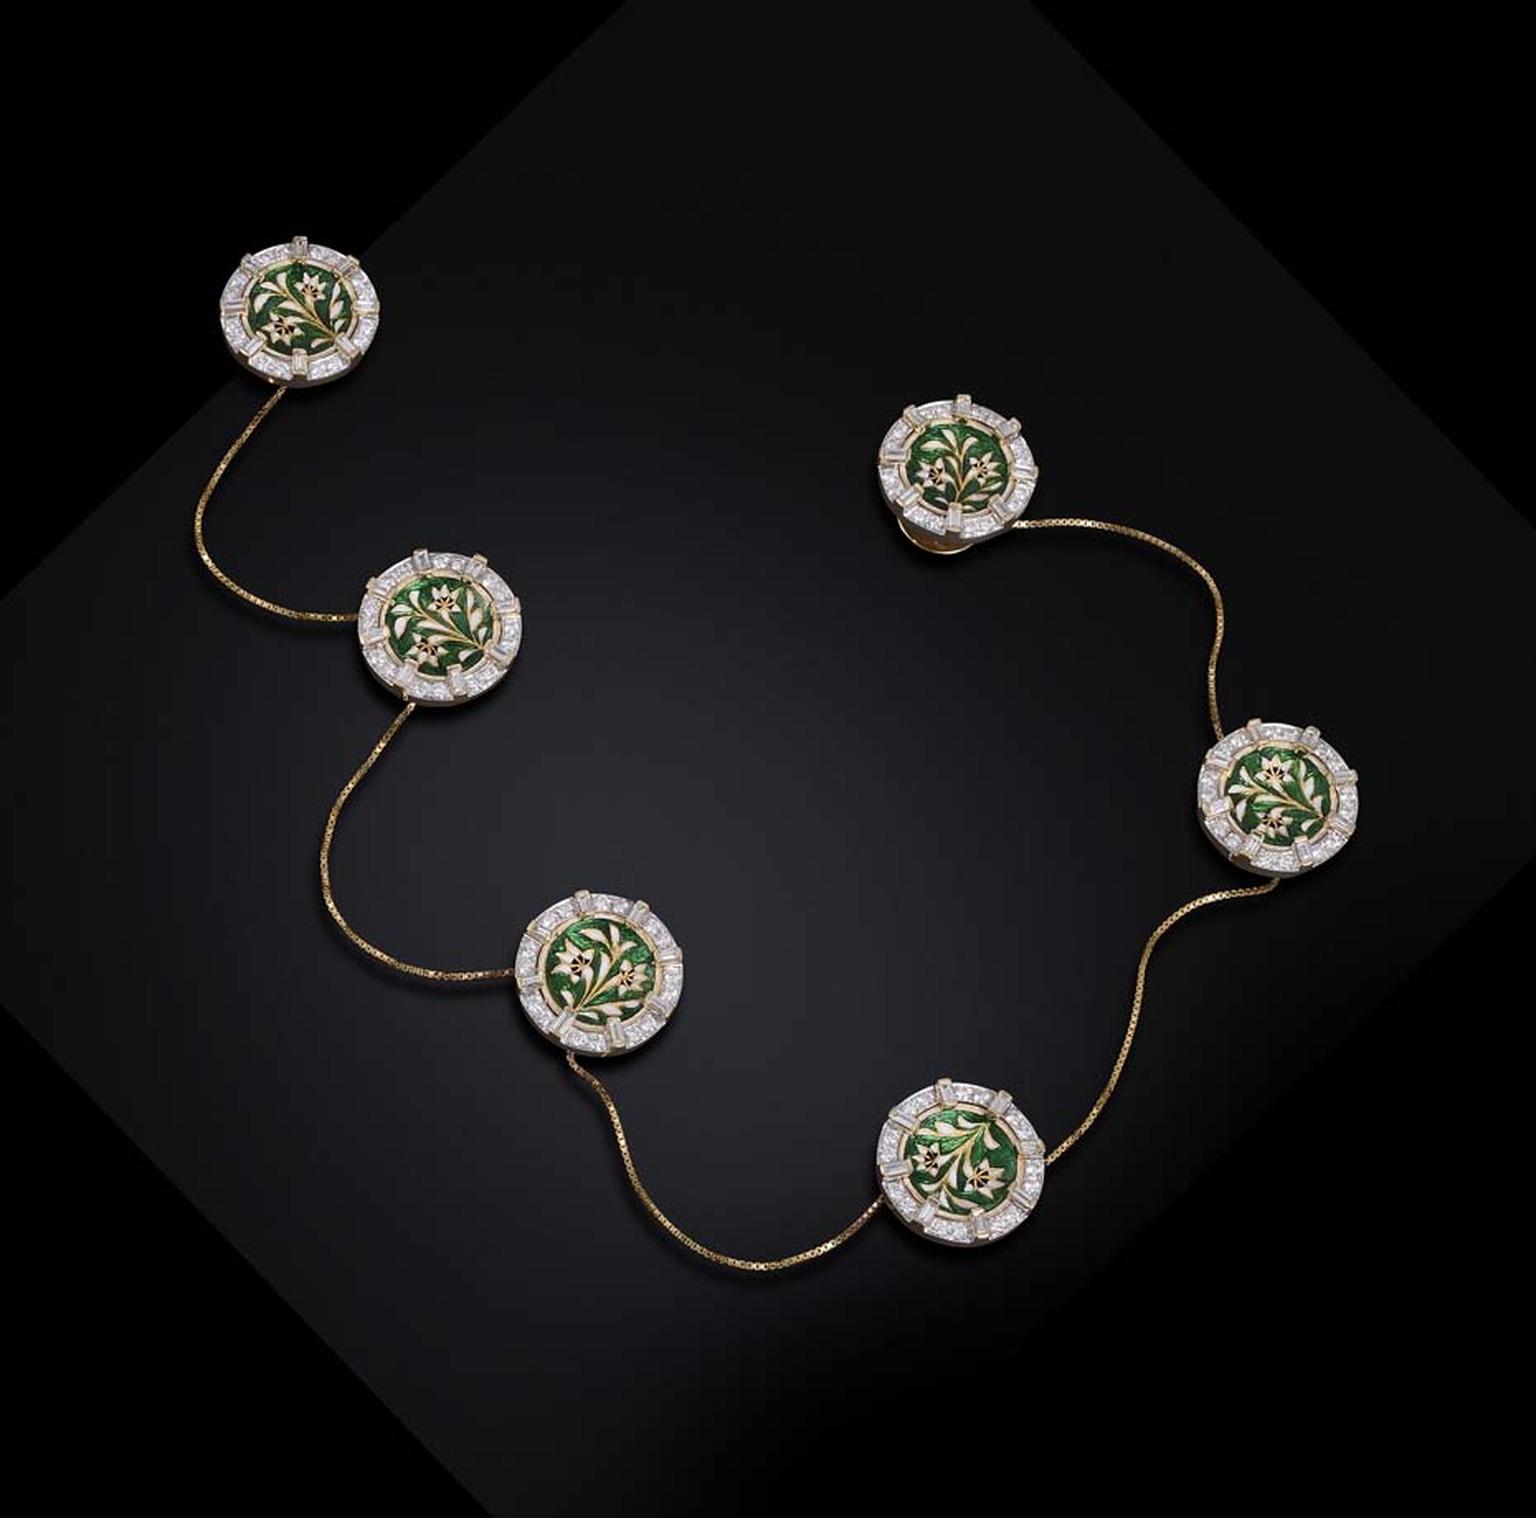 Farah Khan's diamond kurta buttons with rich green and white floral enamel are attached by gold chains.